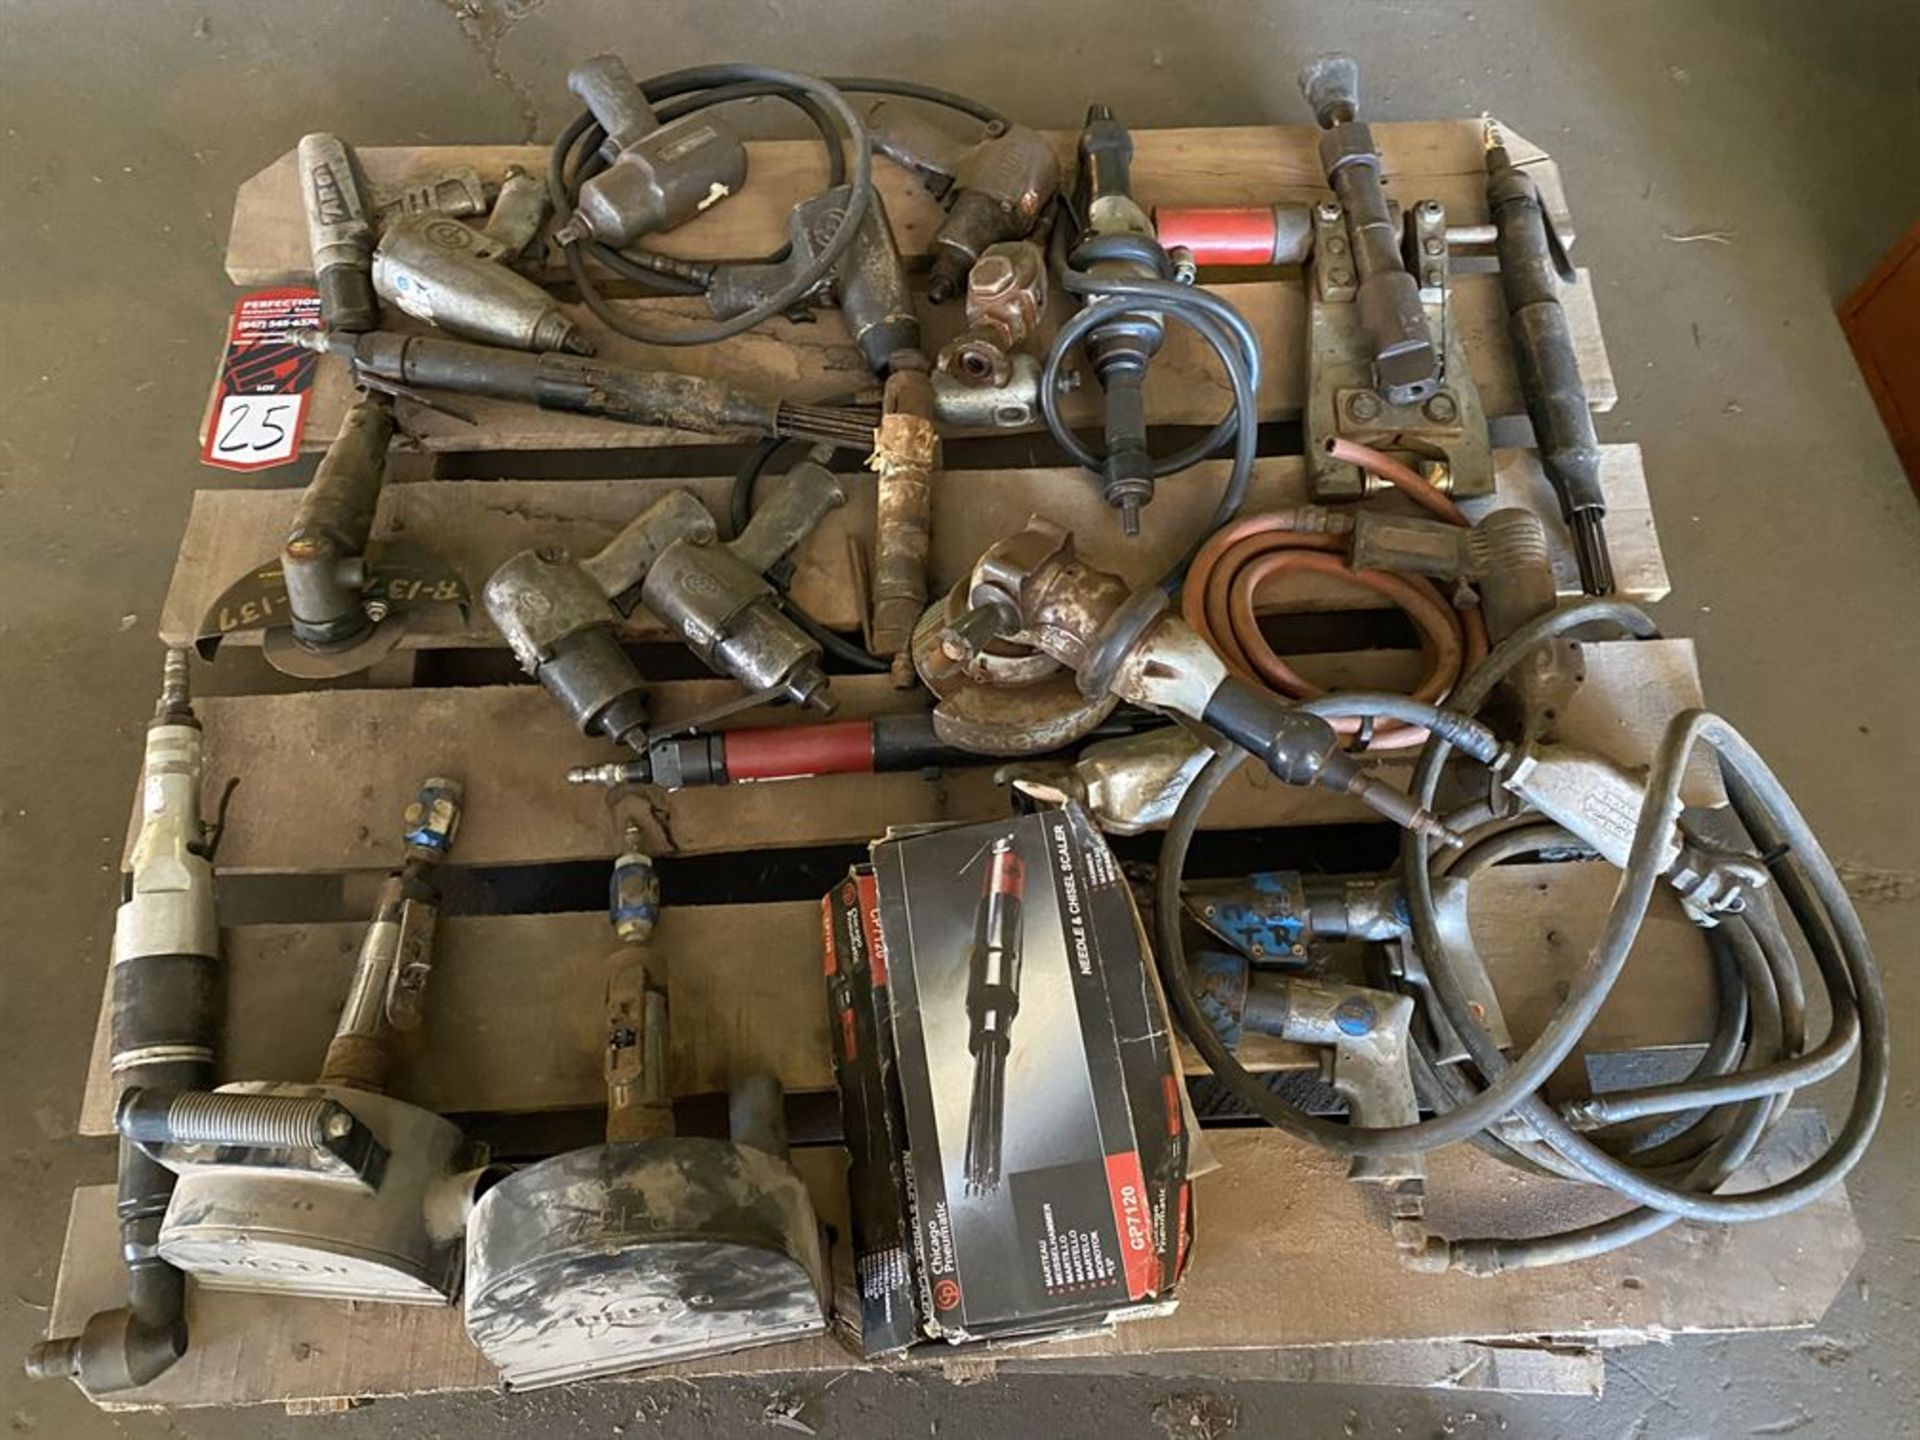 Pallet of Assorted Pneumatic Tools Including Impacts, Scalers, Nibbler and Grinders (Location: